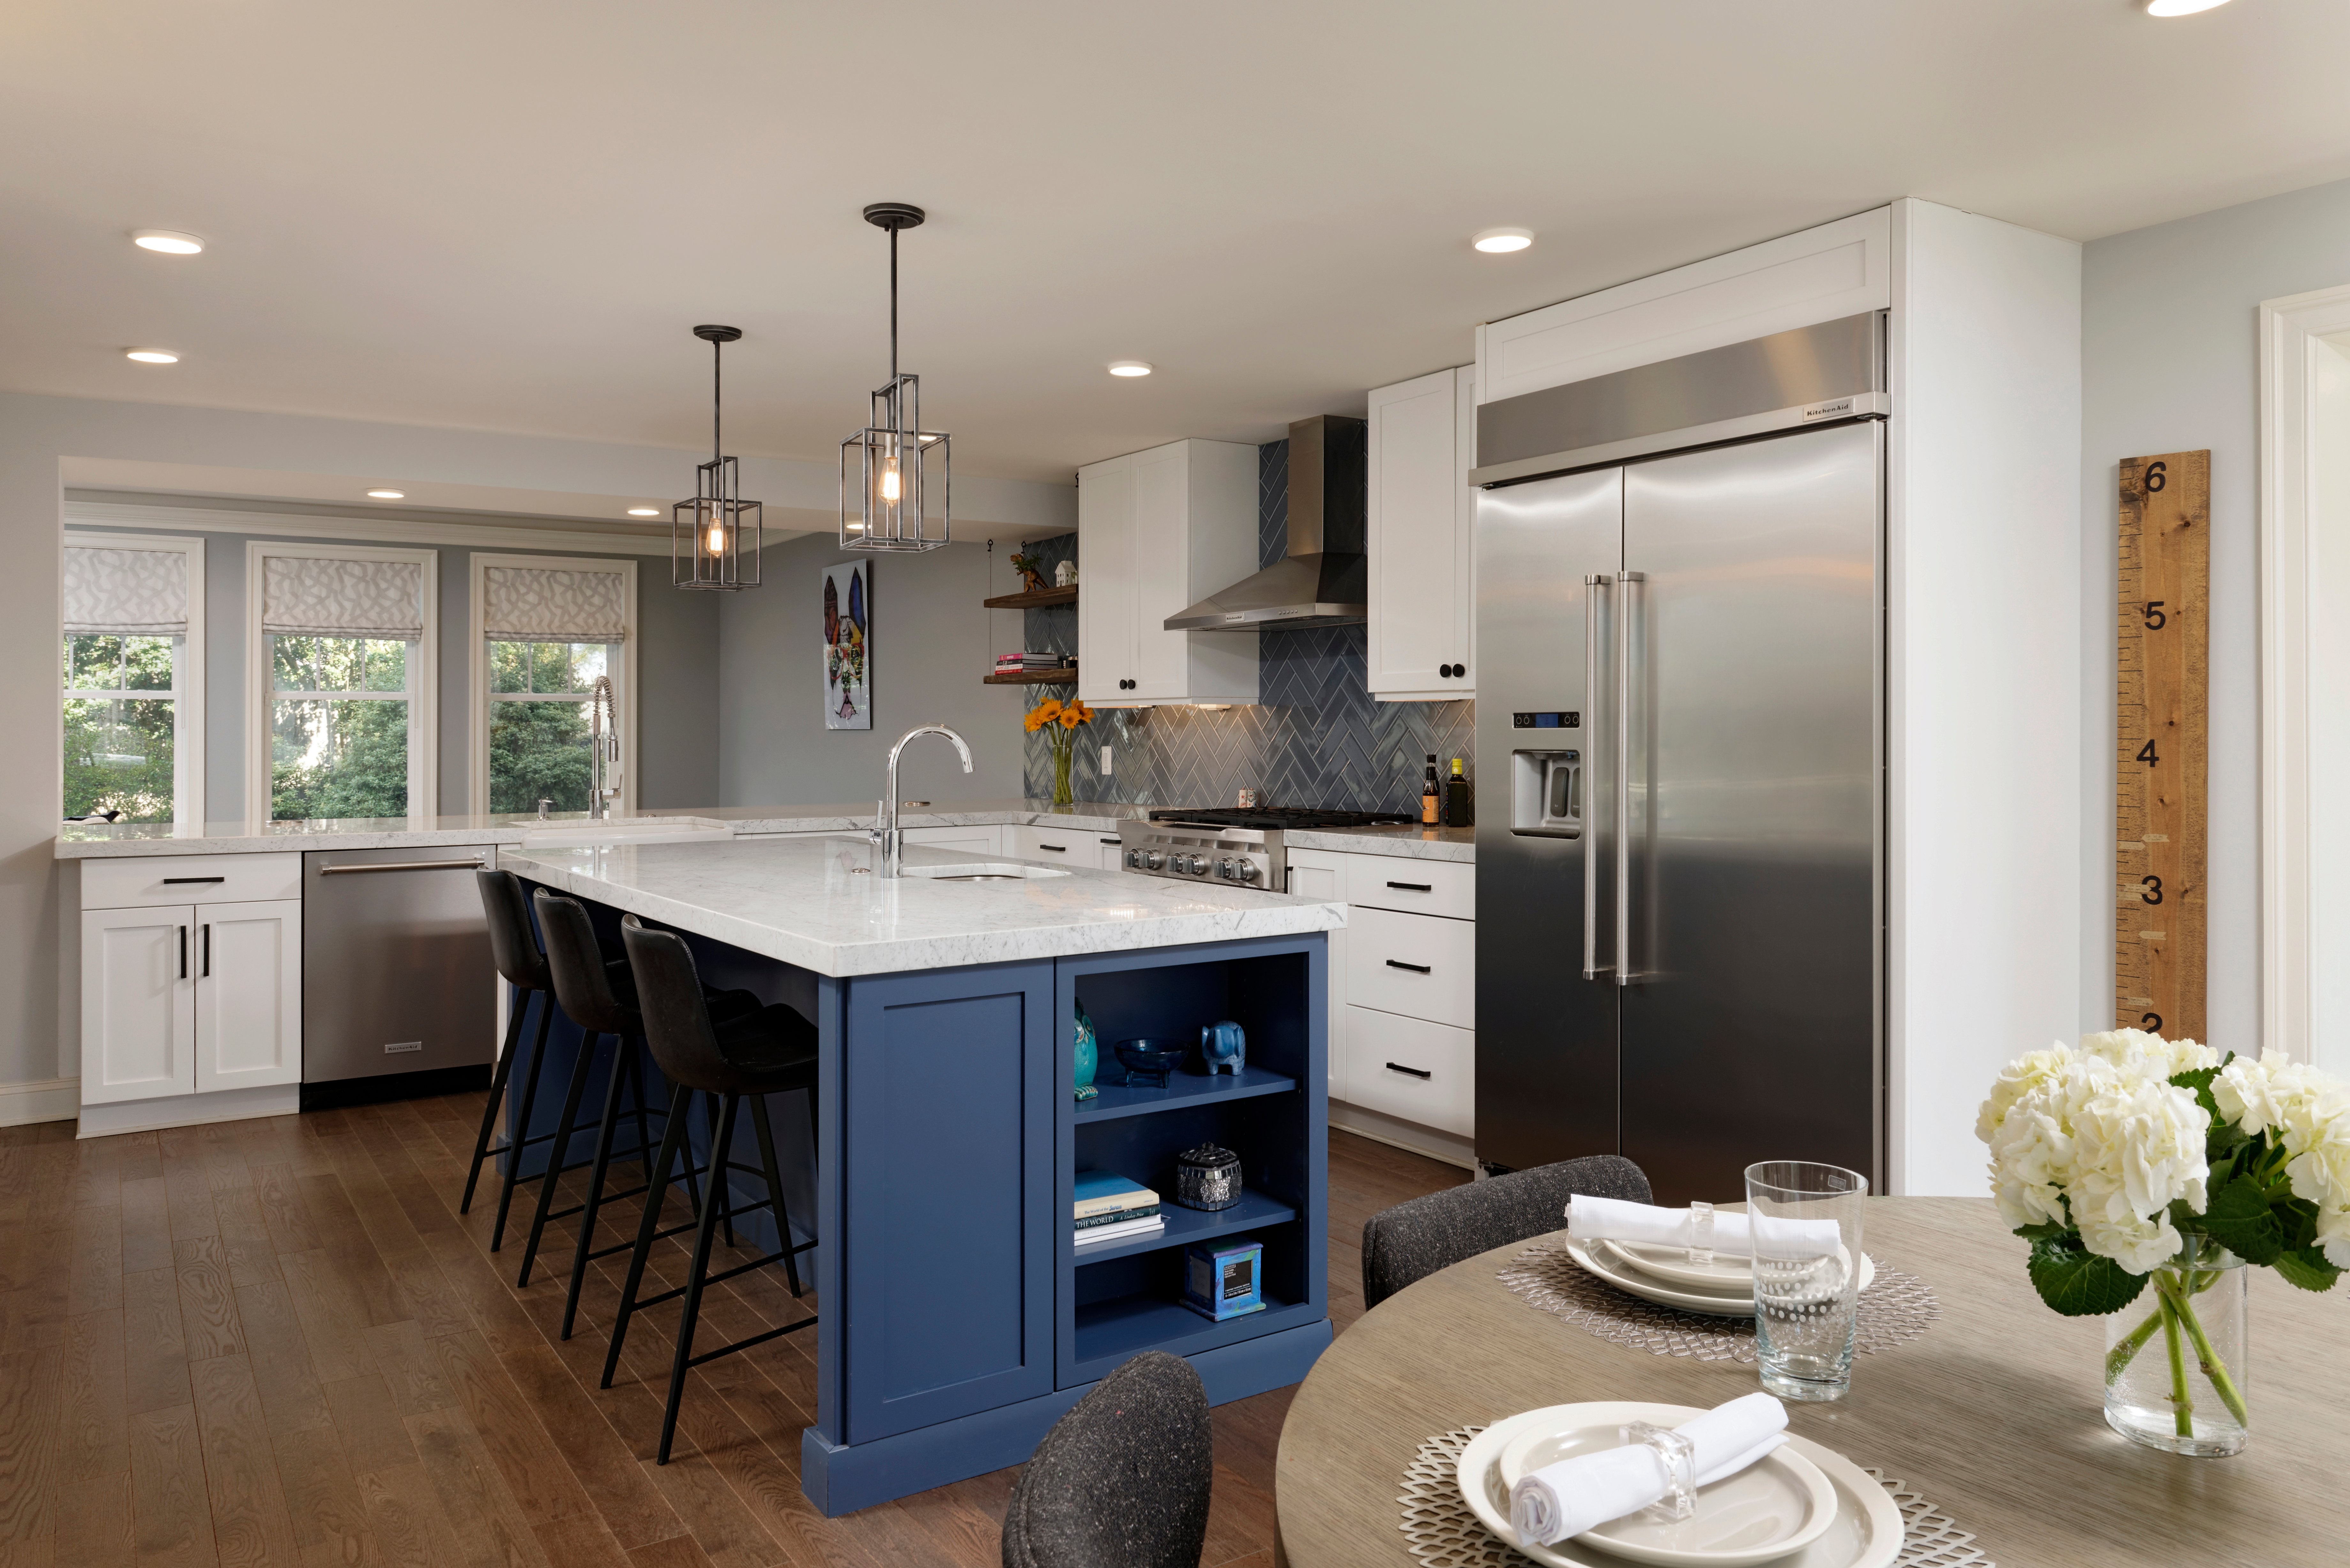 2019 Gold Award Winning Whole-Home Renovation In Rockville